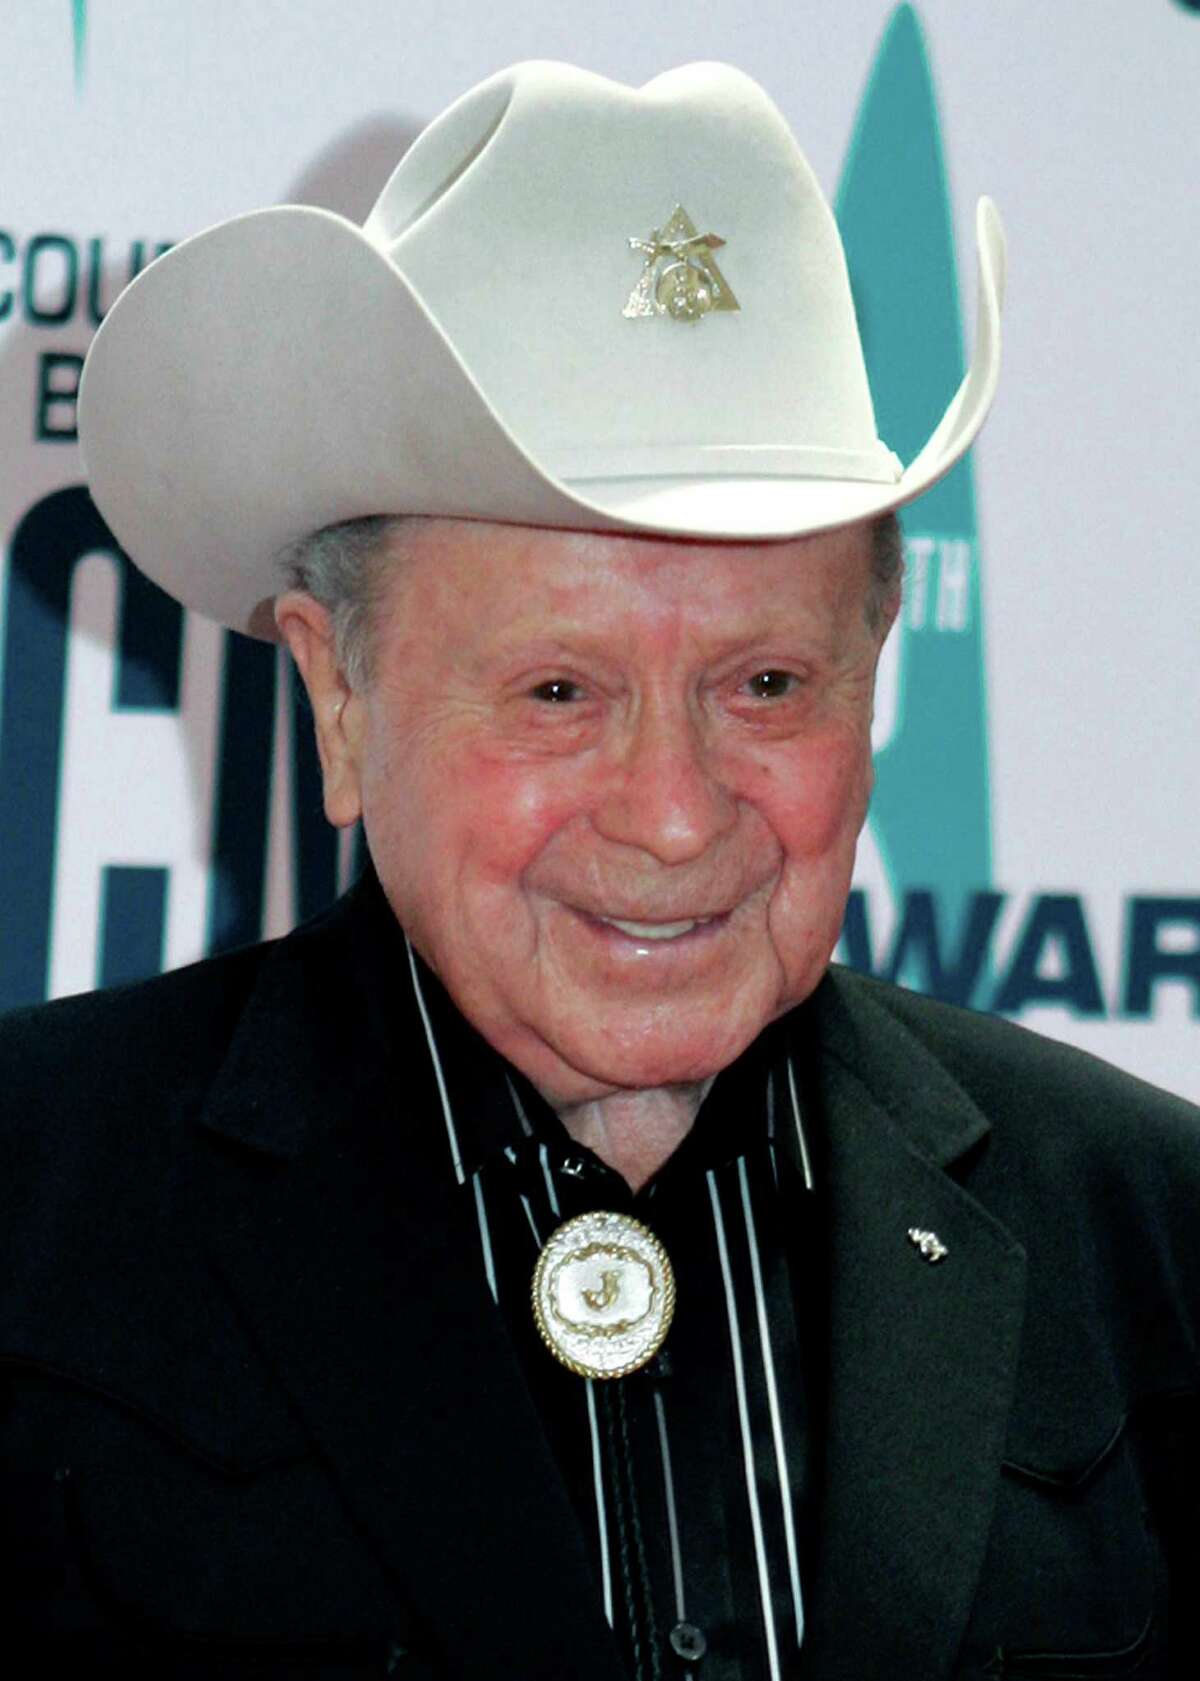 In this Nov. 6, 2006 file photo, Grand Ole Opry star Little Jimmy Dickens arrives at the 40th Annual CMA Awards in Nashville, Tenn. Dickens, a diminutive singer-songwriter who was the oldest cast member of the Grand Ole Opry, has died. Dickens, 94, died Friday, Jan. 2, 2015, at a Nashville-area hospital of cardiac arrest after suffering a stroke on Christmas Day, Opry spokeswoman Jessie Schmidt said.